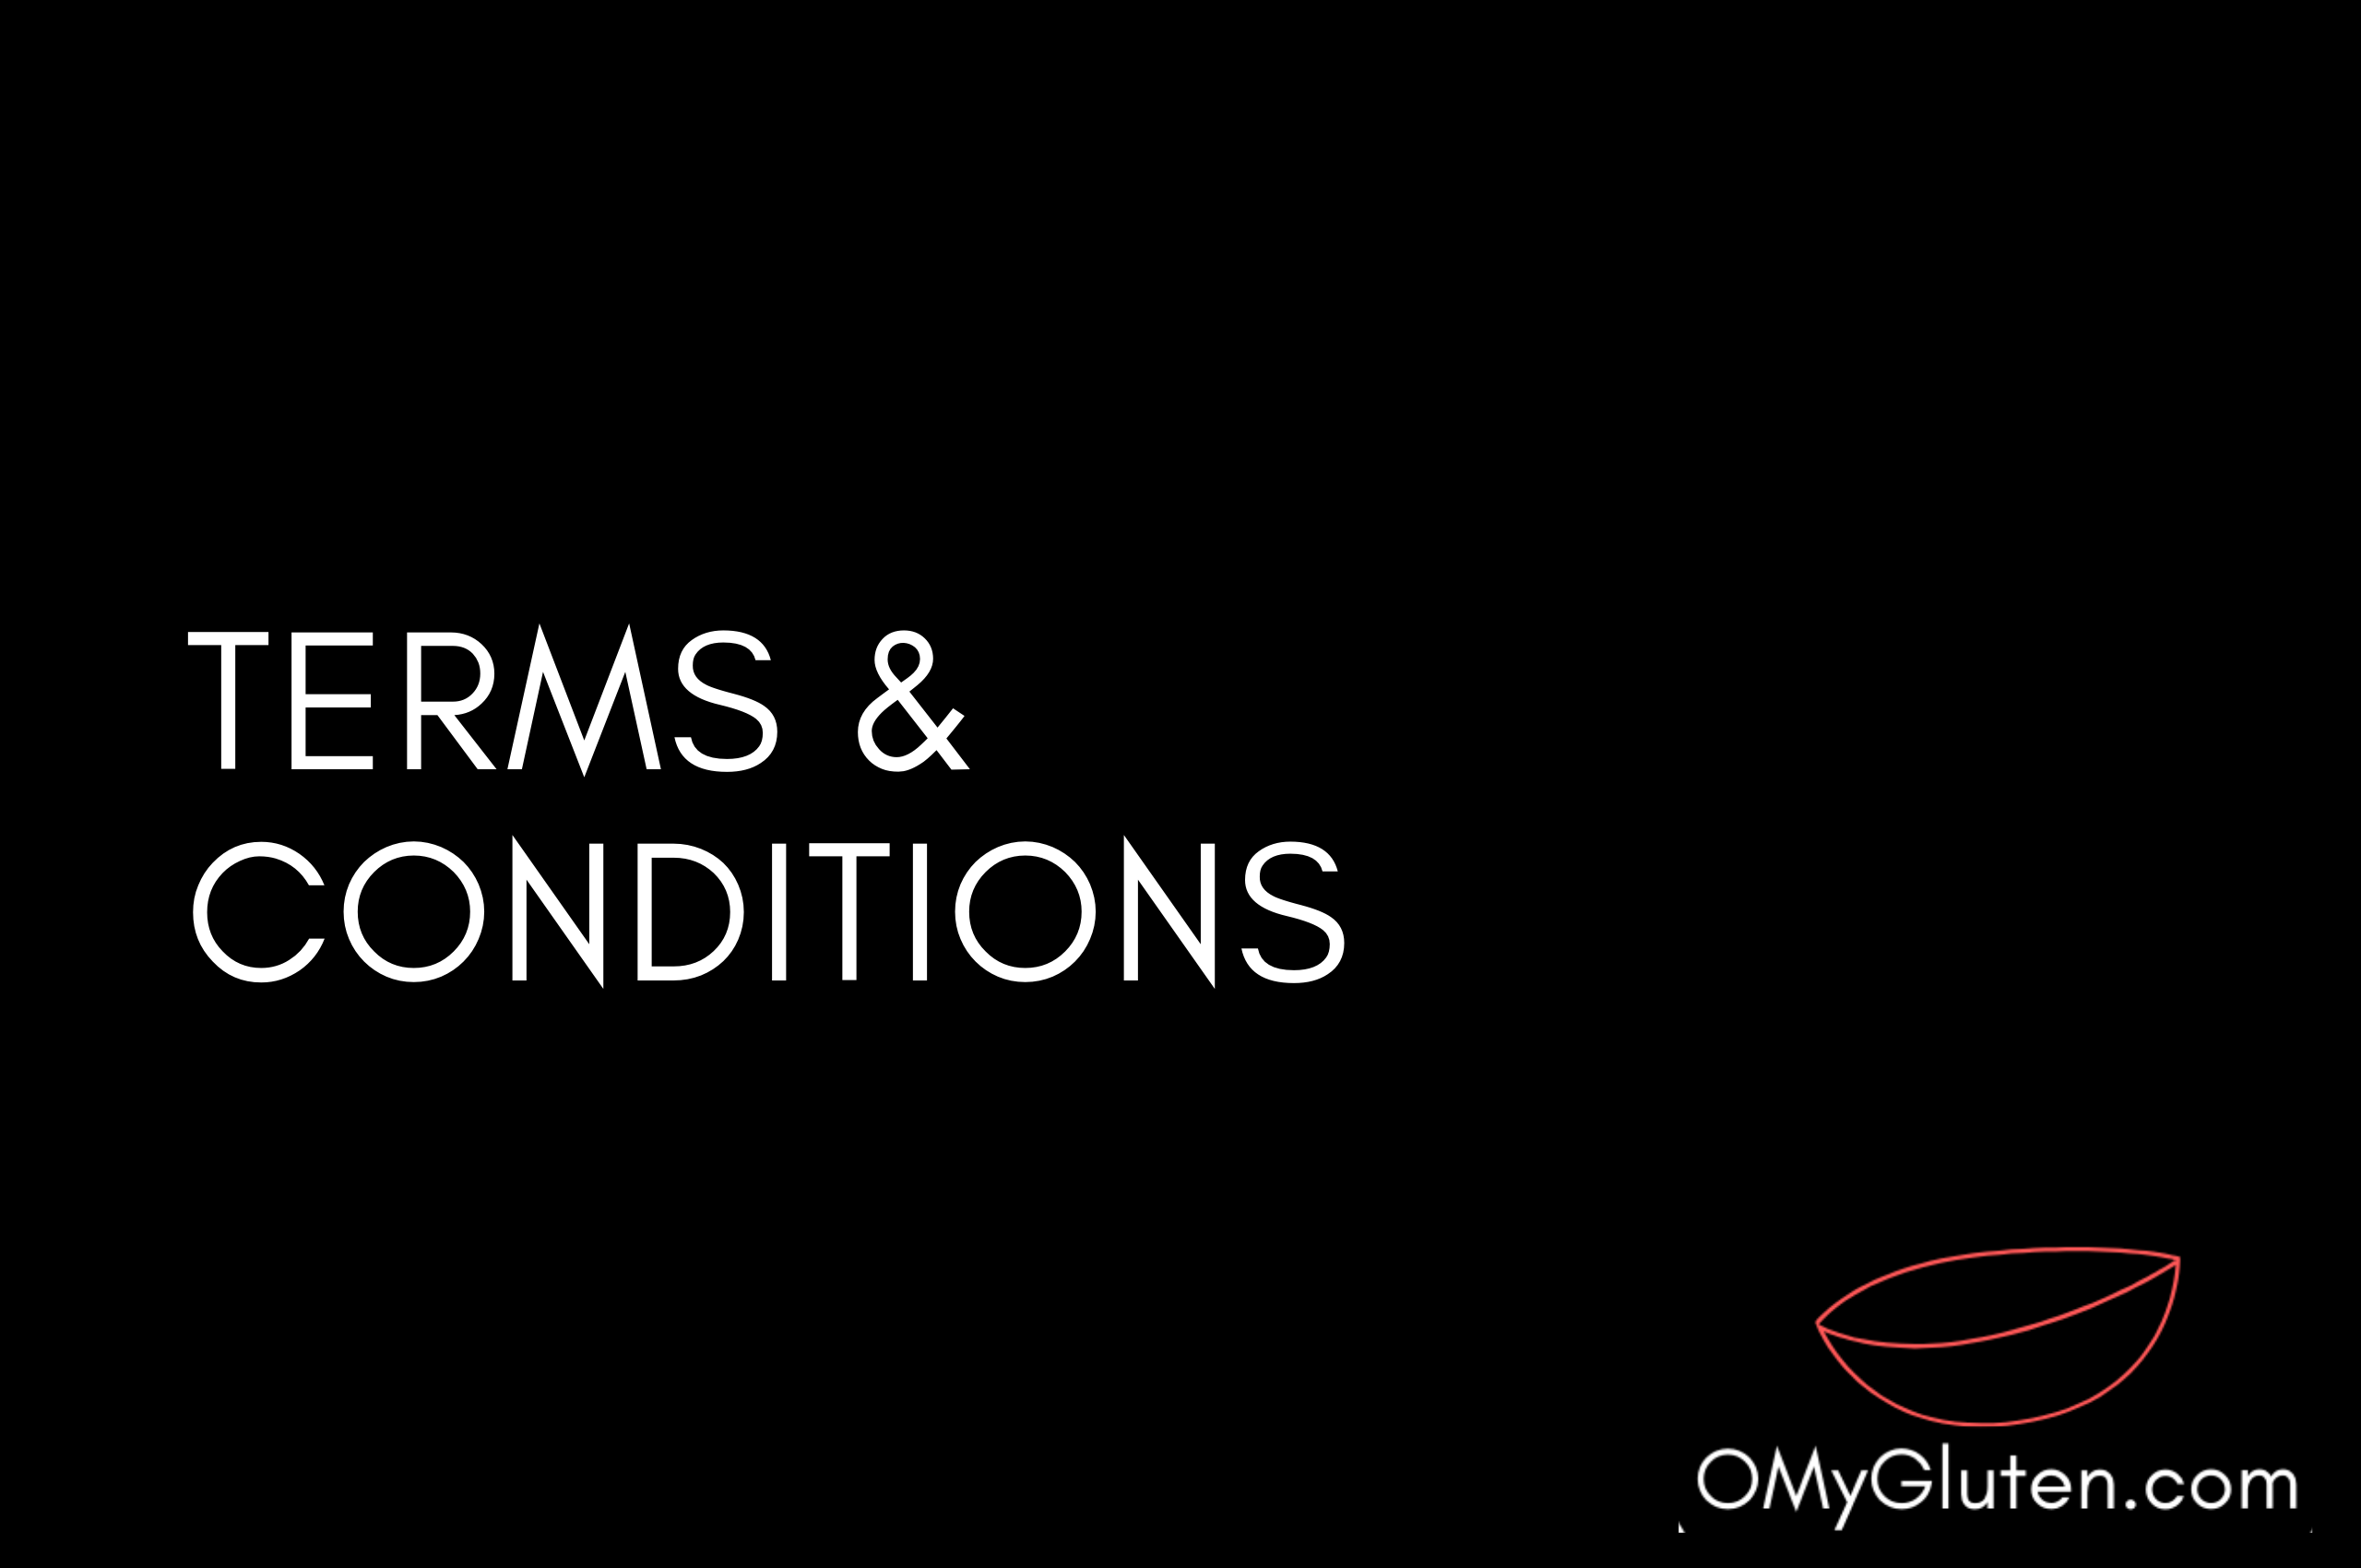 Image contains text which reads "Terms and Conditions" and includes a logo of OMyGluten, which is a small, empty bowl.